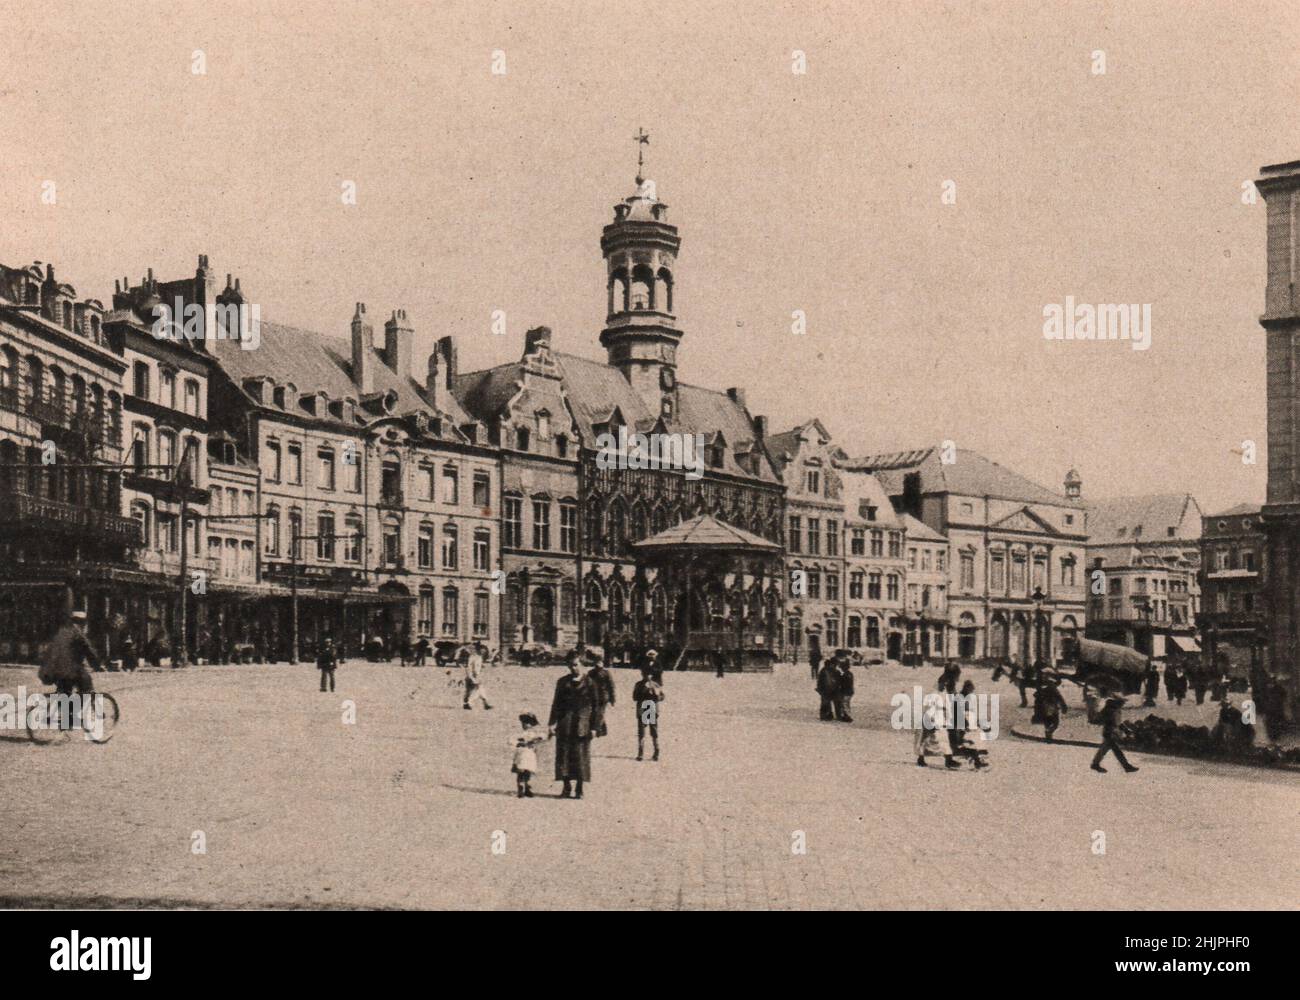 Few Places in Europe have seen the coming and going of so many armies as the Grand' place of Mons, the capital of Hainault. Belgium (1923) Stock Photo